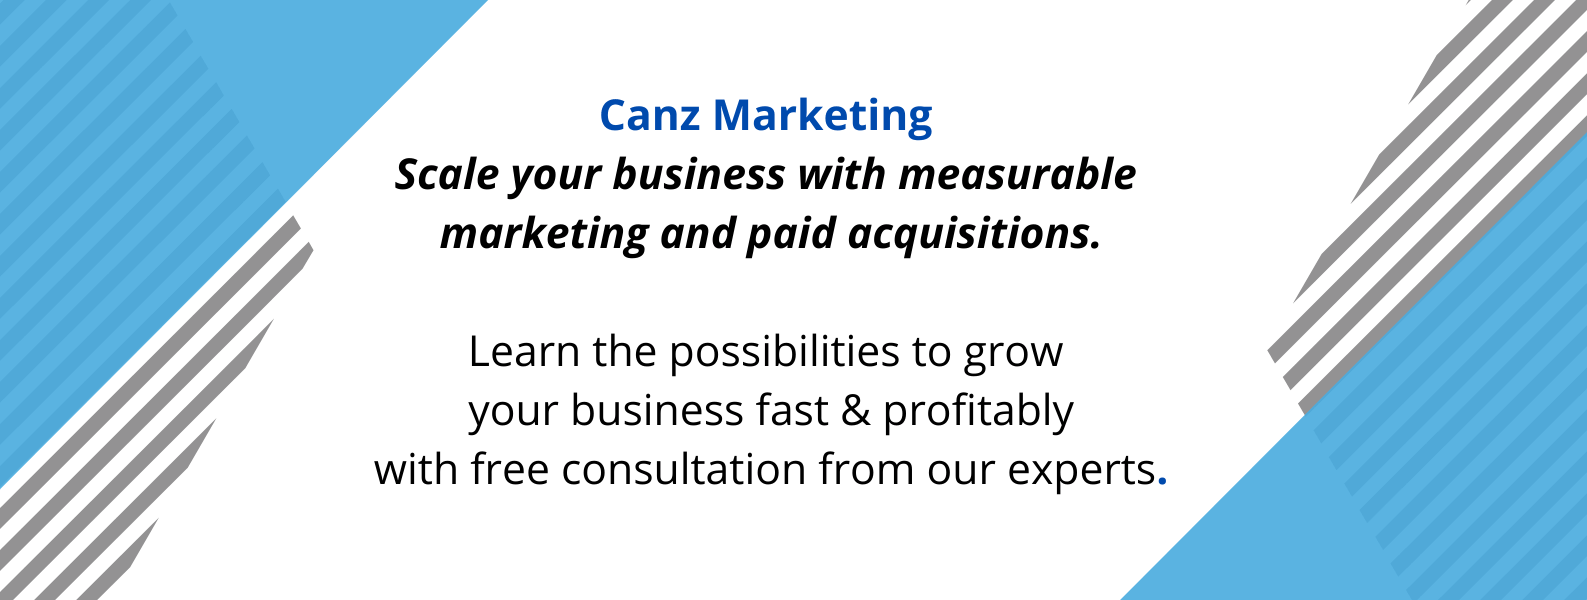 Unique selling proposition of Canz Marketing, a digital marketing agency.